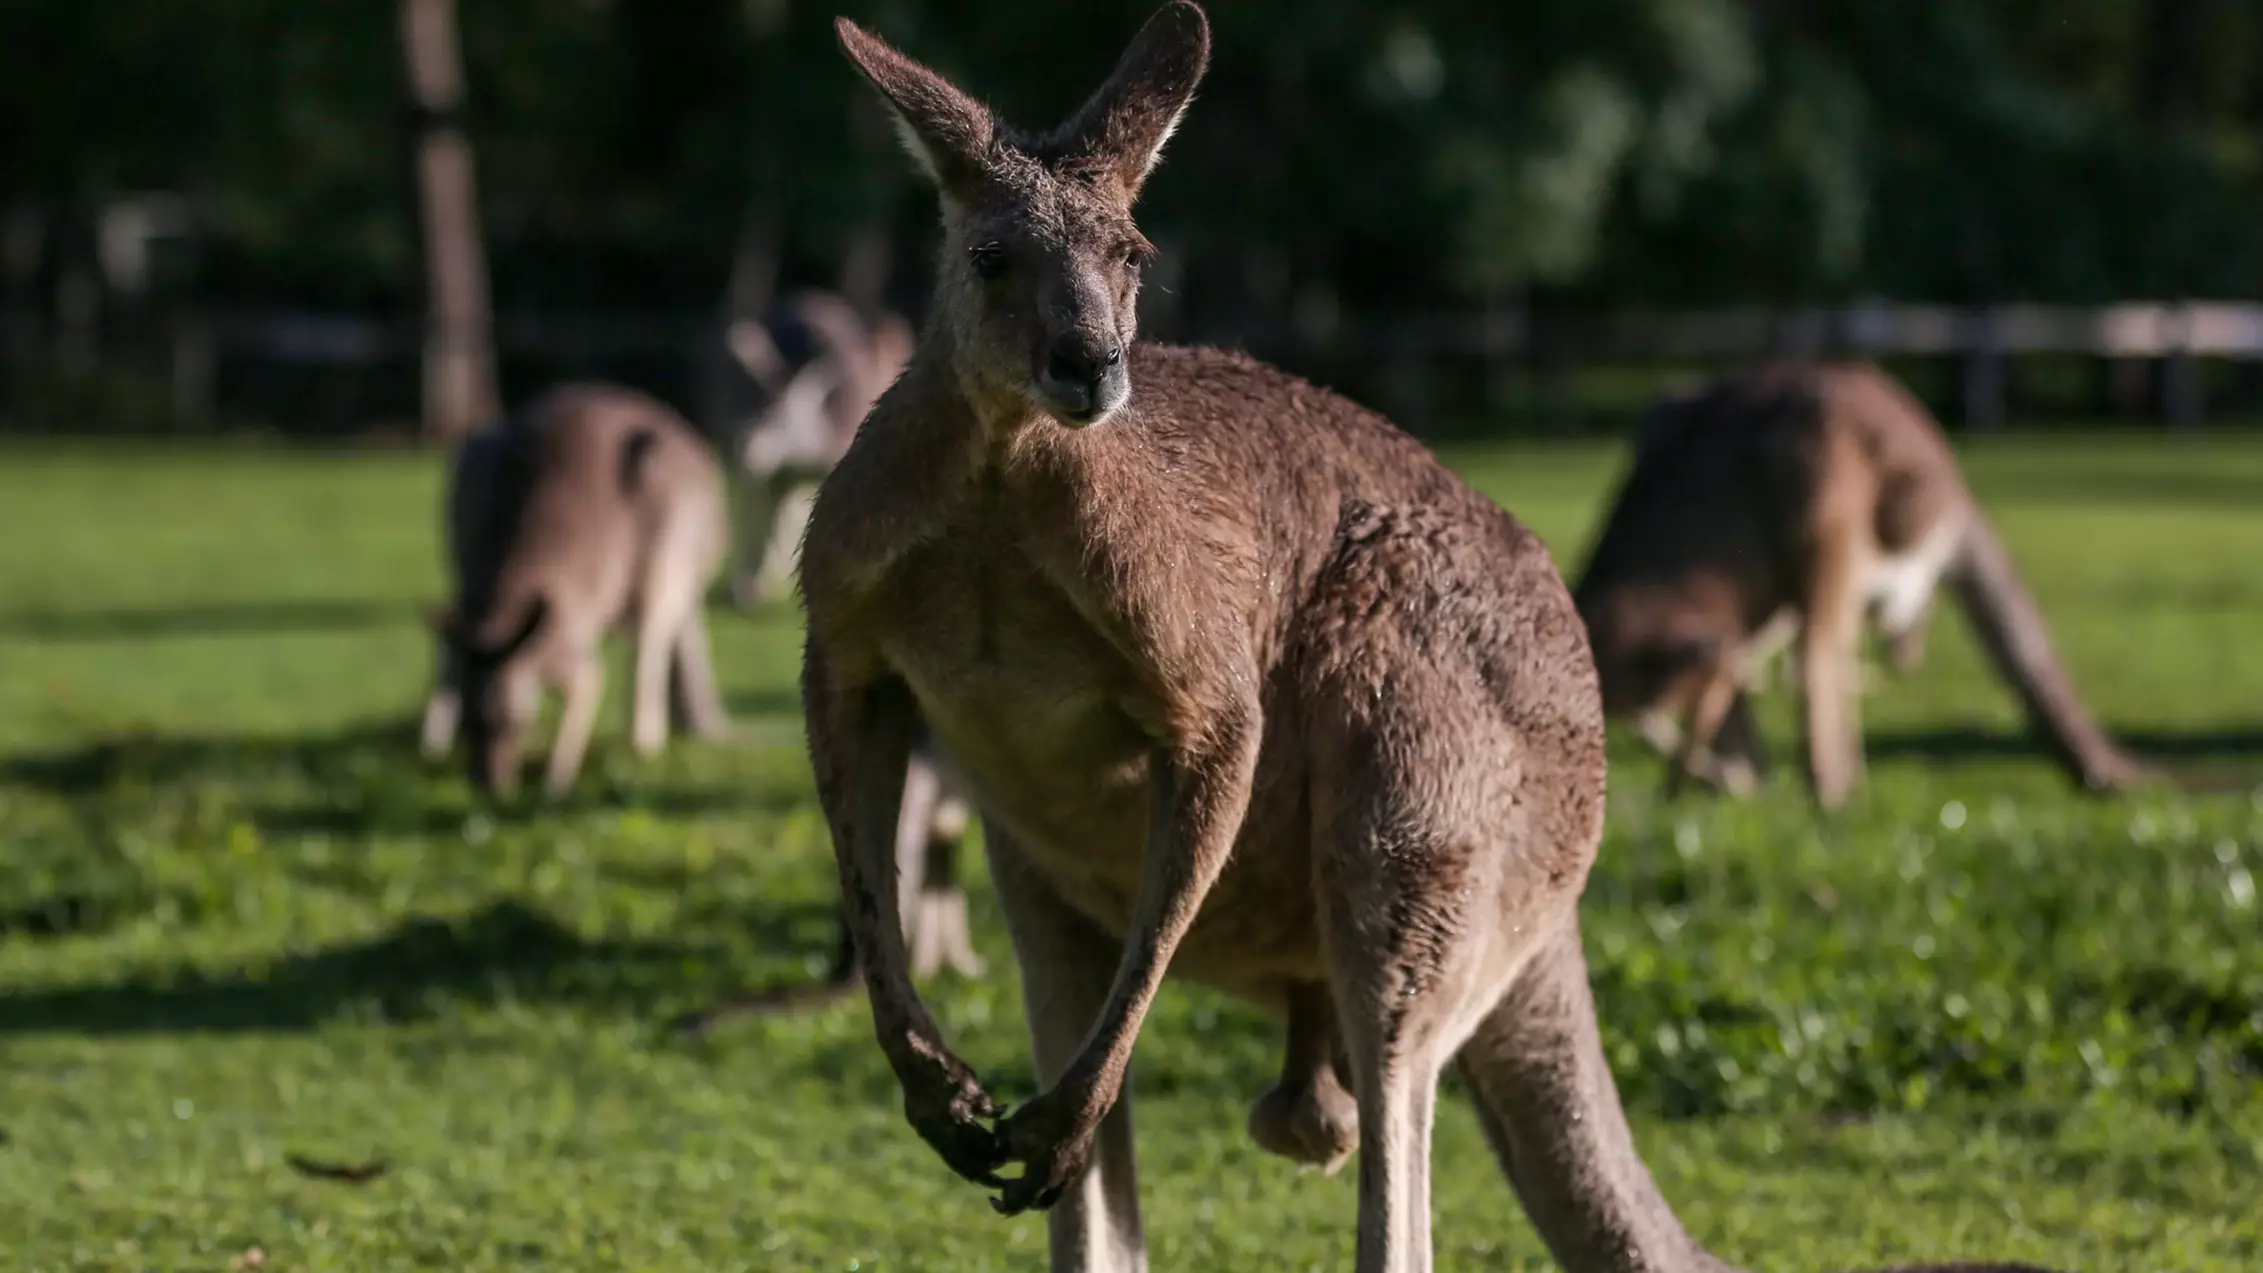 Two Men Charged With The Prolonged Torture Of A Kangaroo In NSW